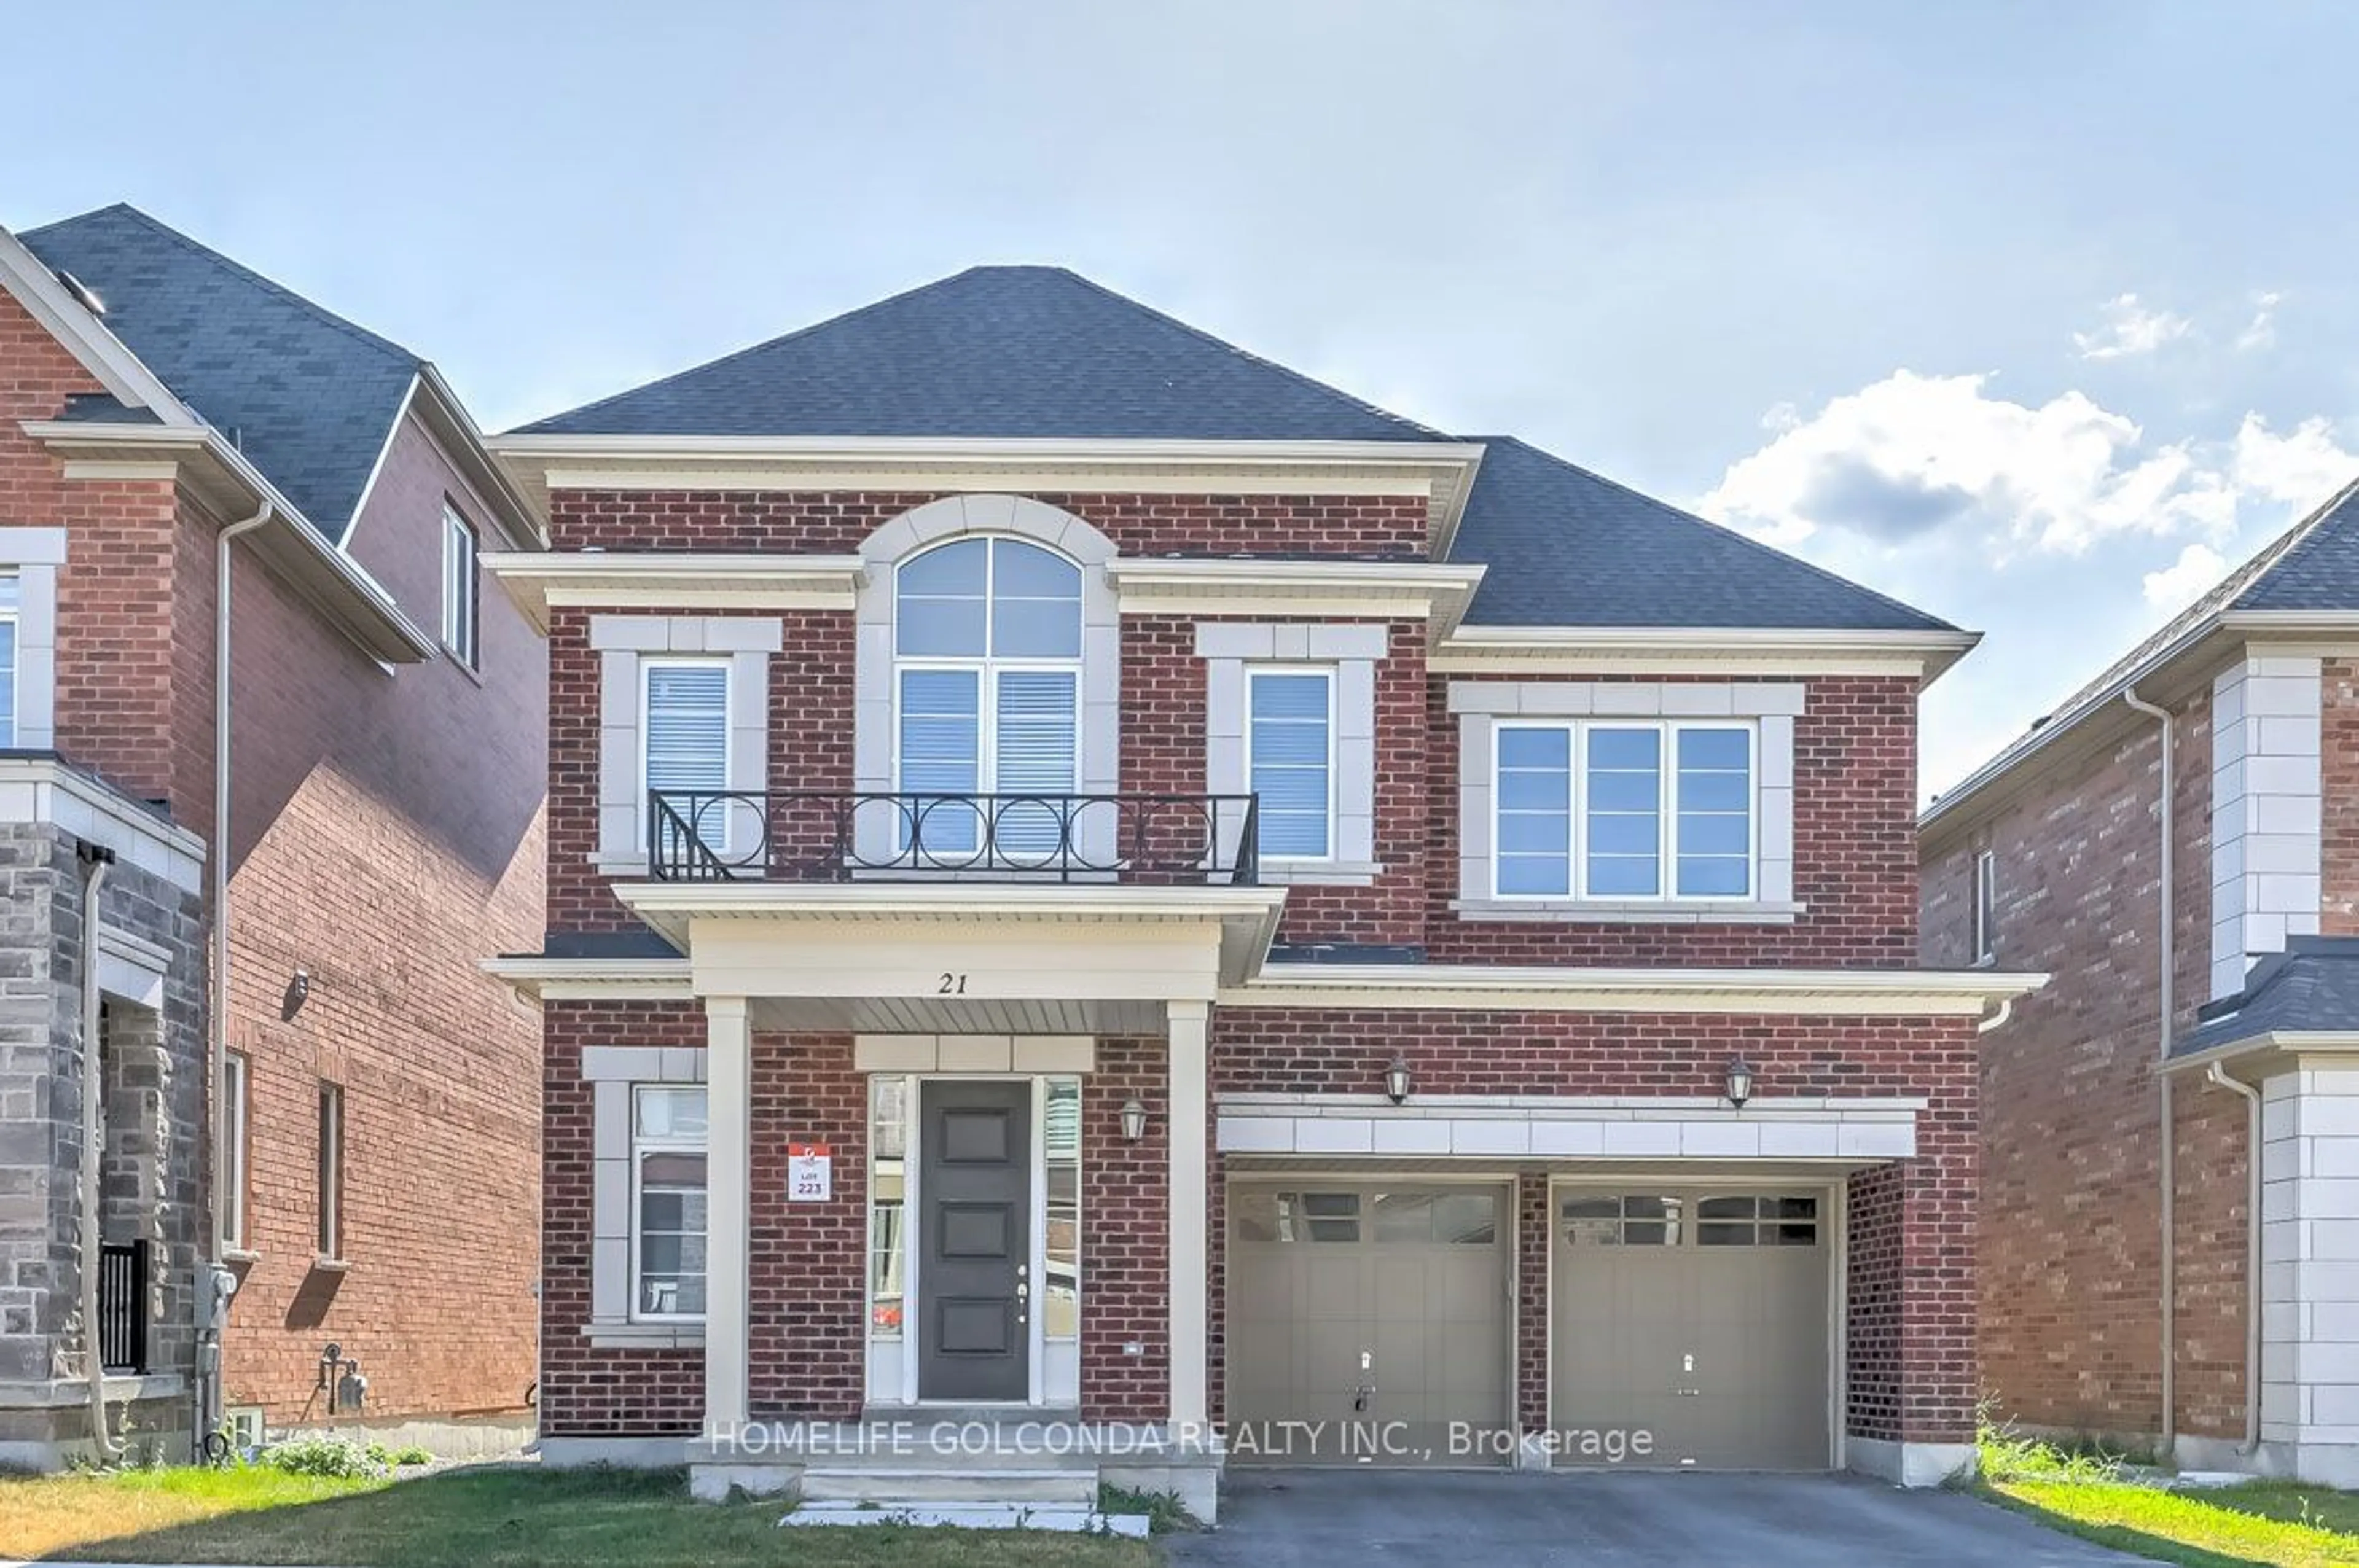 Home with brick exterior material for 21 Planet St, Richmond Hill Ontario L4C 8P5